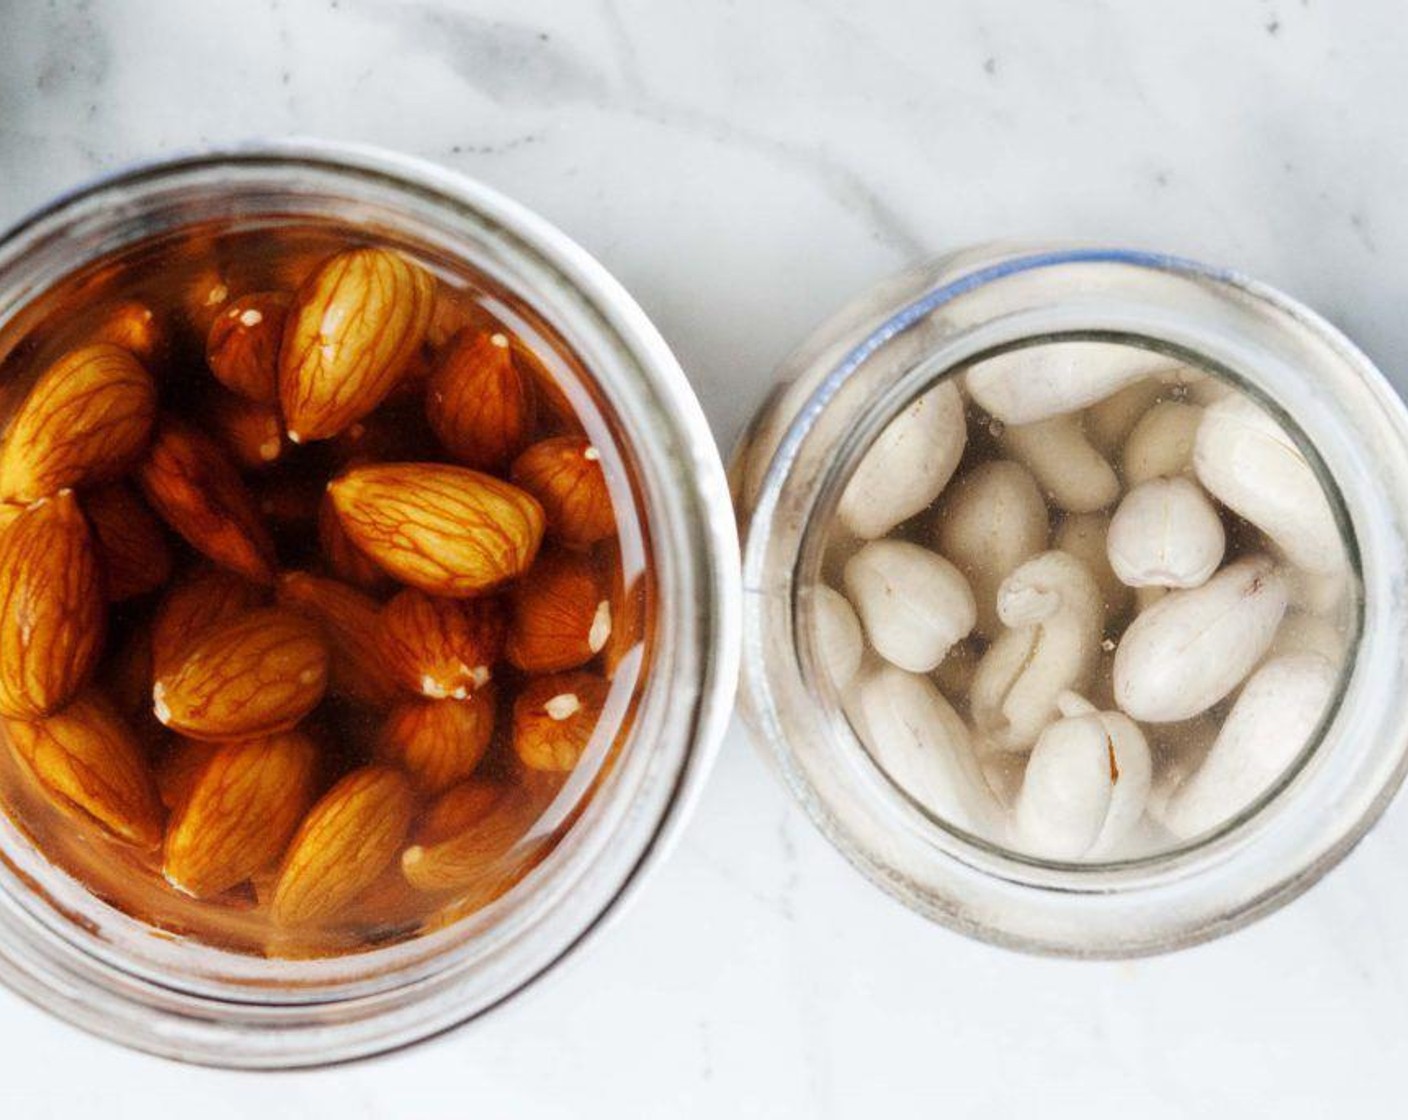 step 1 Soaked Almonds (1/2 cup) in water and salt overnighte, then dehydrate them at a low temperature. Do the same for Cashew Nuts (1/2 cup), but only soak them for 4 hours.